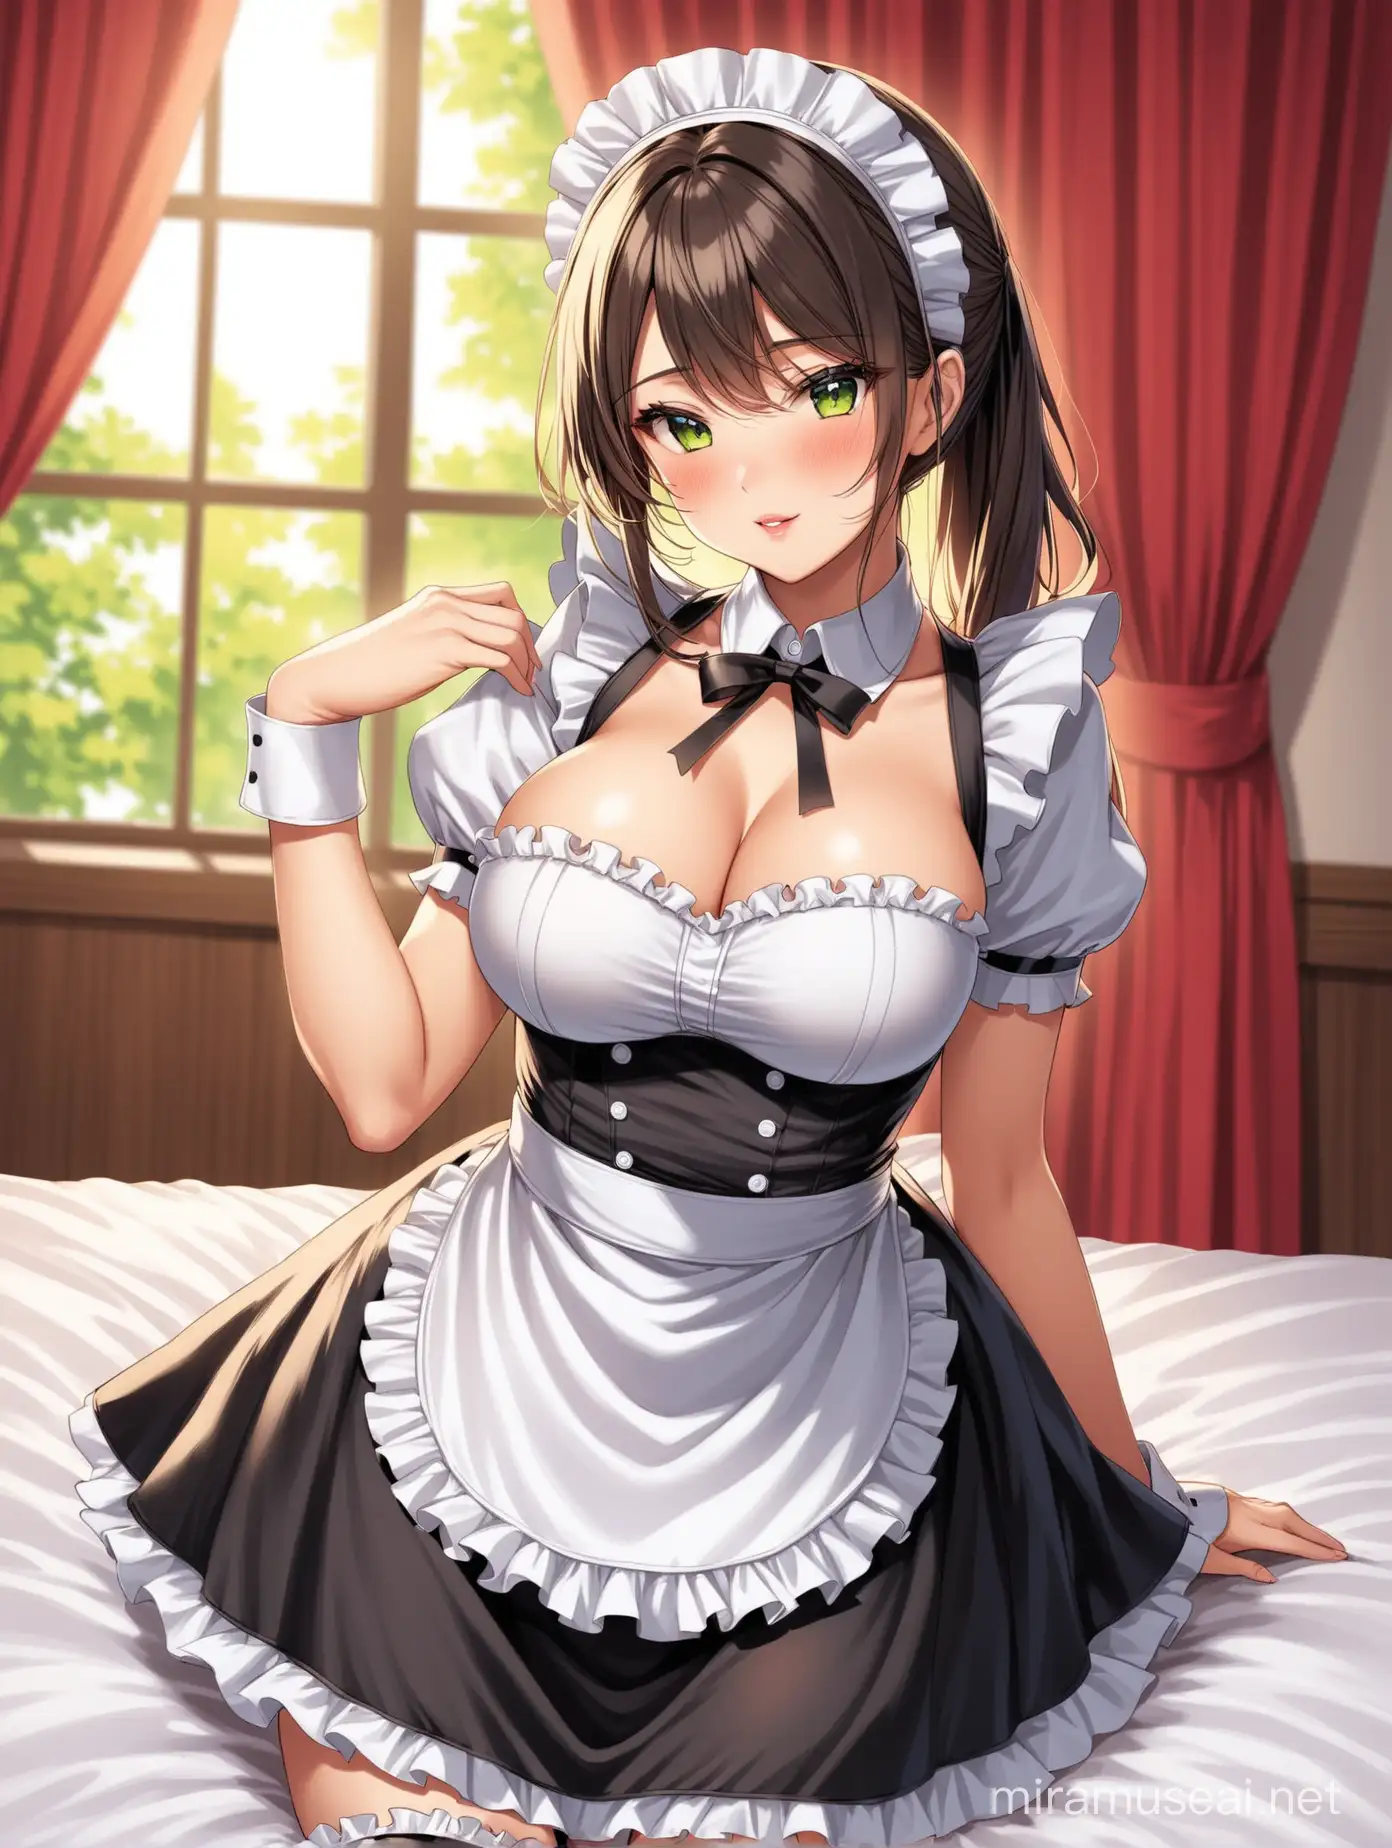 Woman in Elegant Maid Costume with Sophisticated Attire